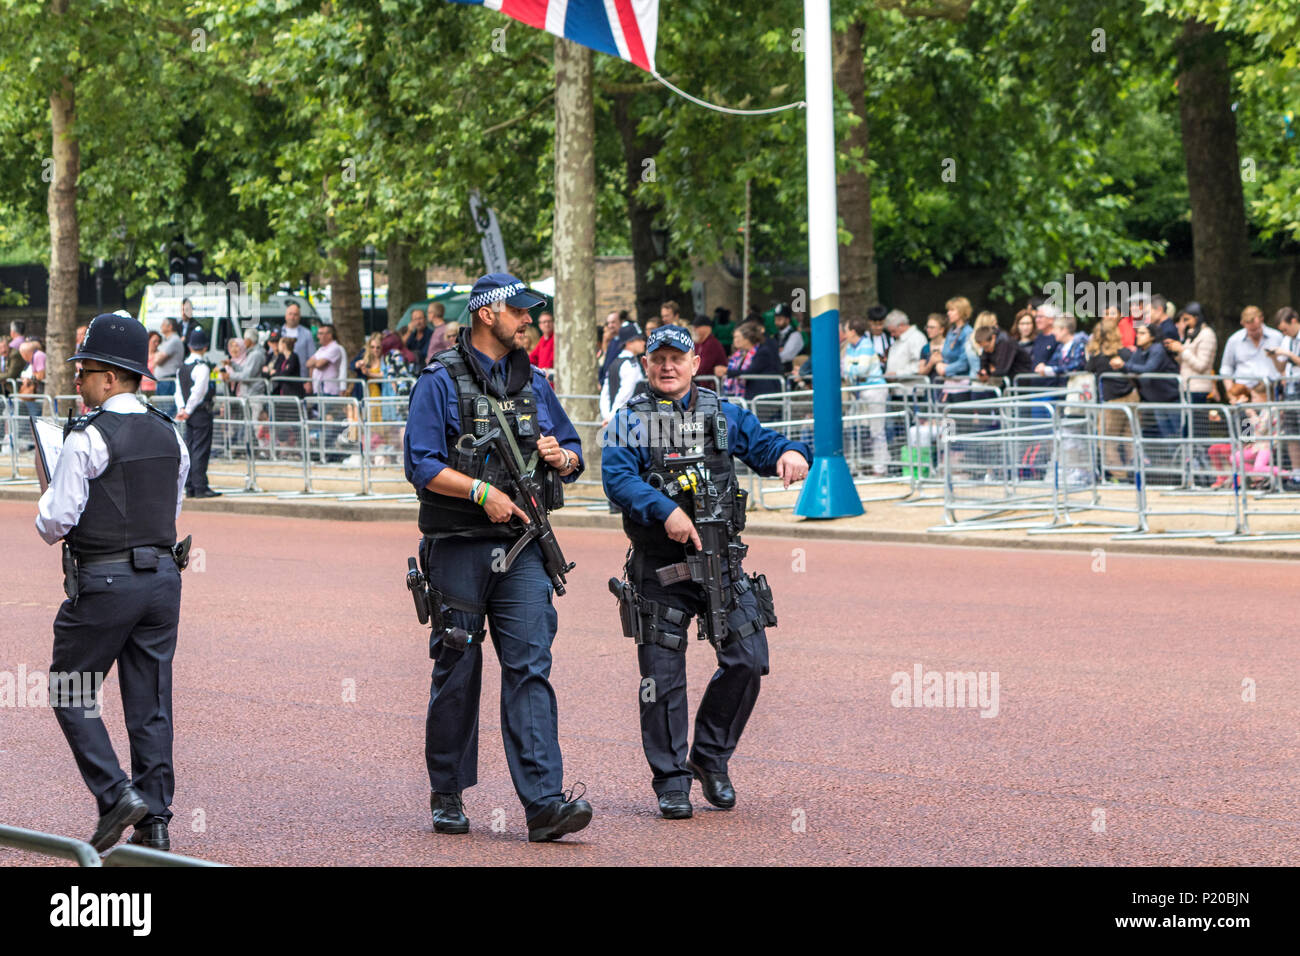 Armed Police officers of The Specialist Firearms Command SCO19  patrolling the crowds at The Trooping Of The Colour Ceremony, The Mall, London, UK Stock Photo